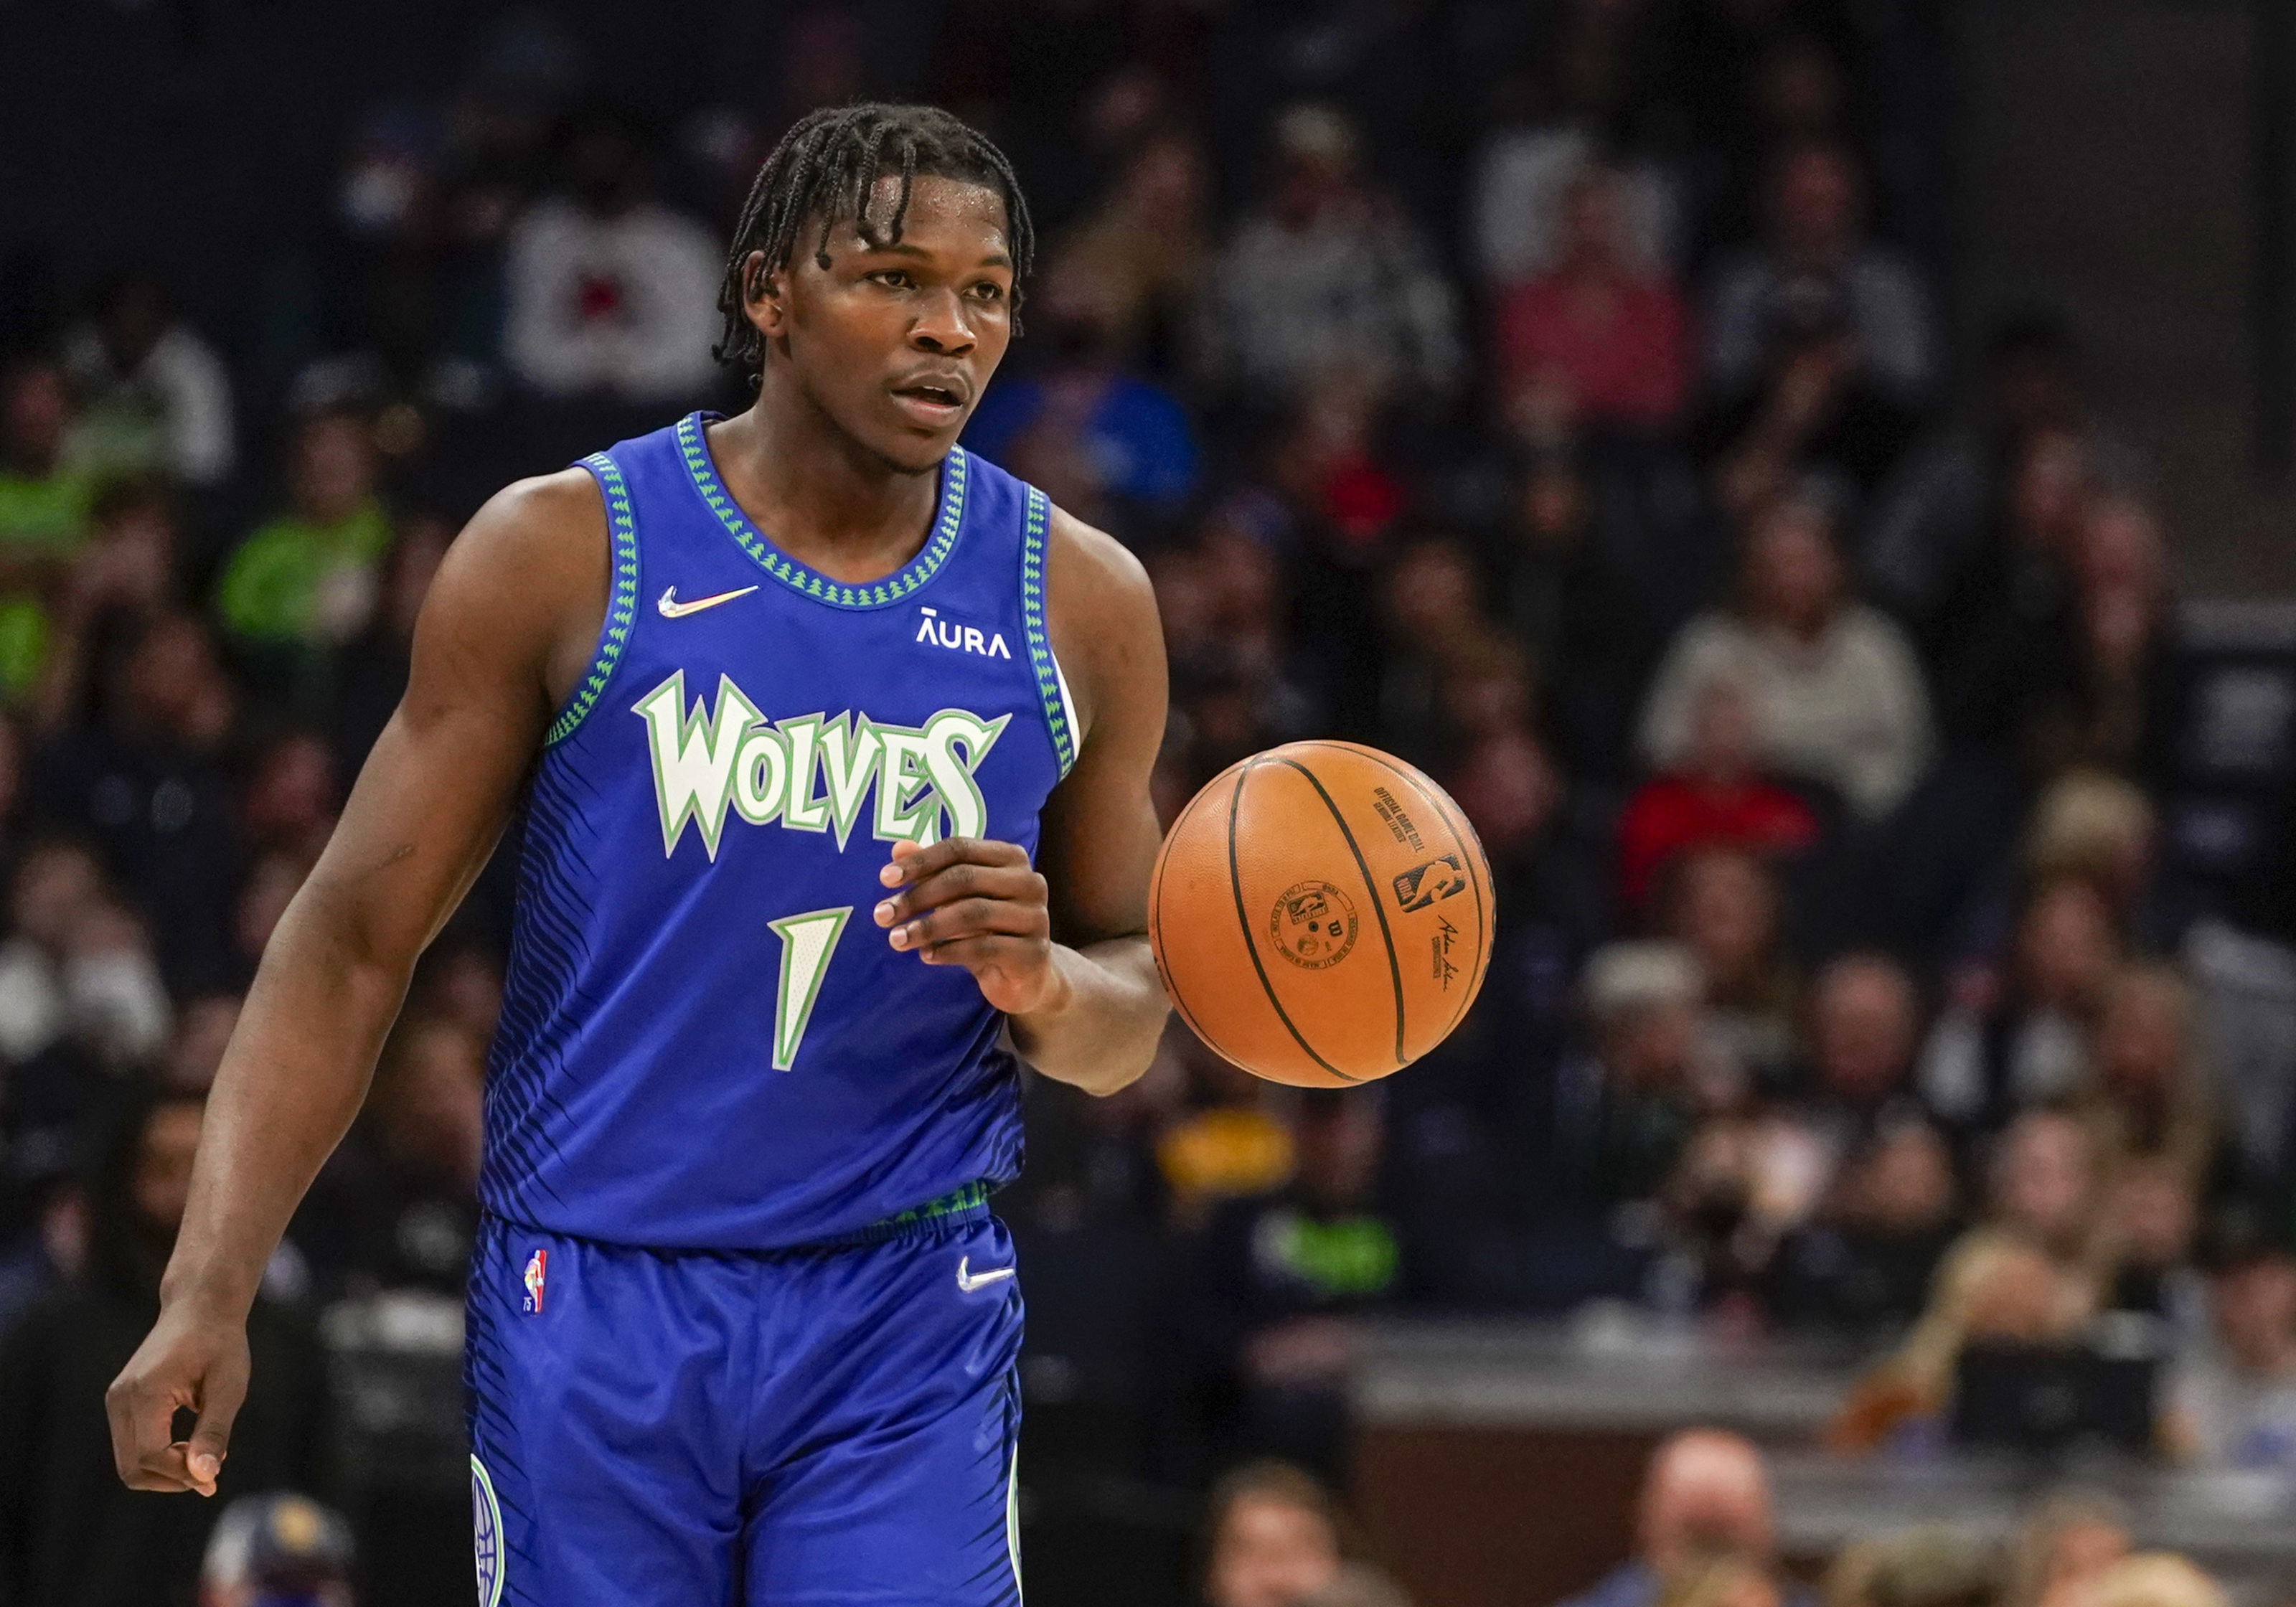 Anthony Edwards drops 40 points to lead Timberwolves to win in